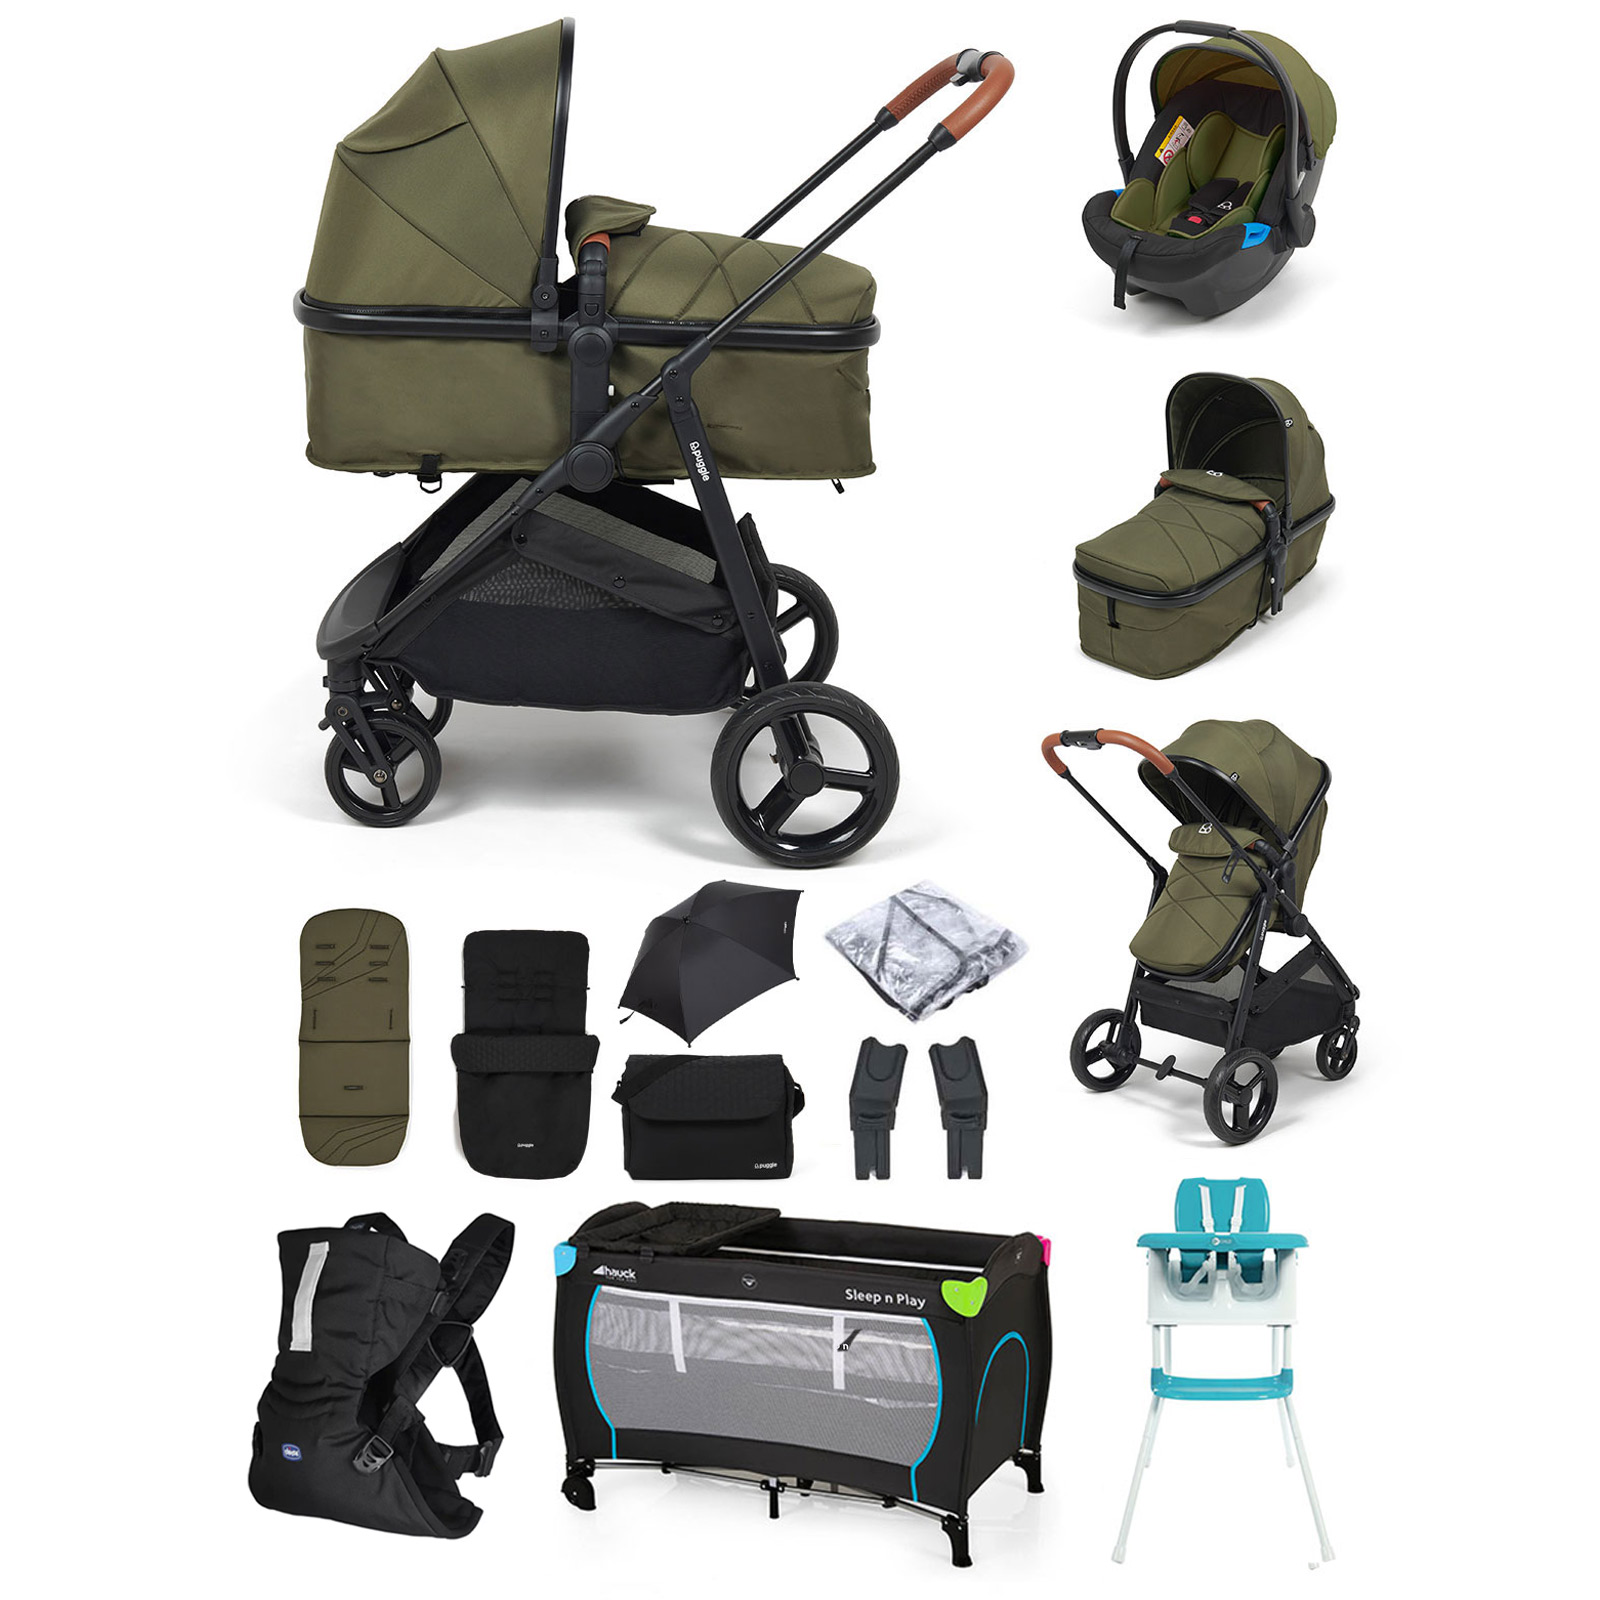 Puggle Monaco XT 2in1 Pram Pushchair Everything You Need Travel System with Footmuff, Changing Bag & Parasol - Forest Green